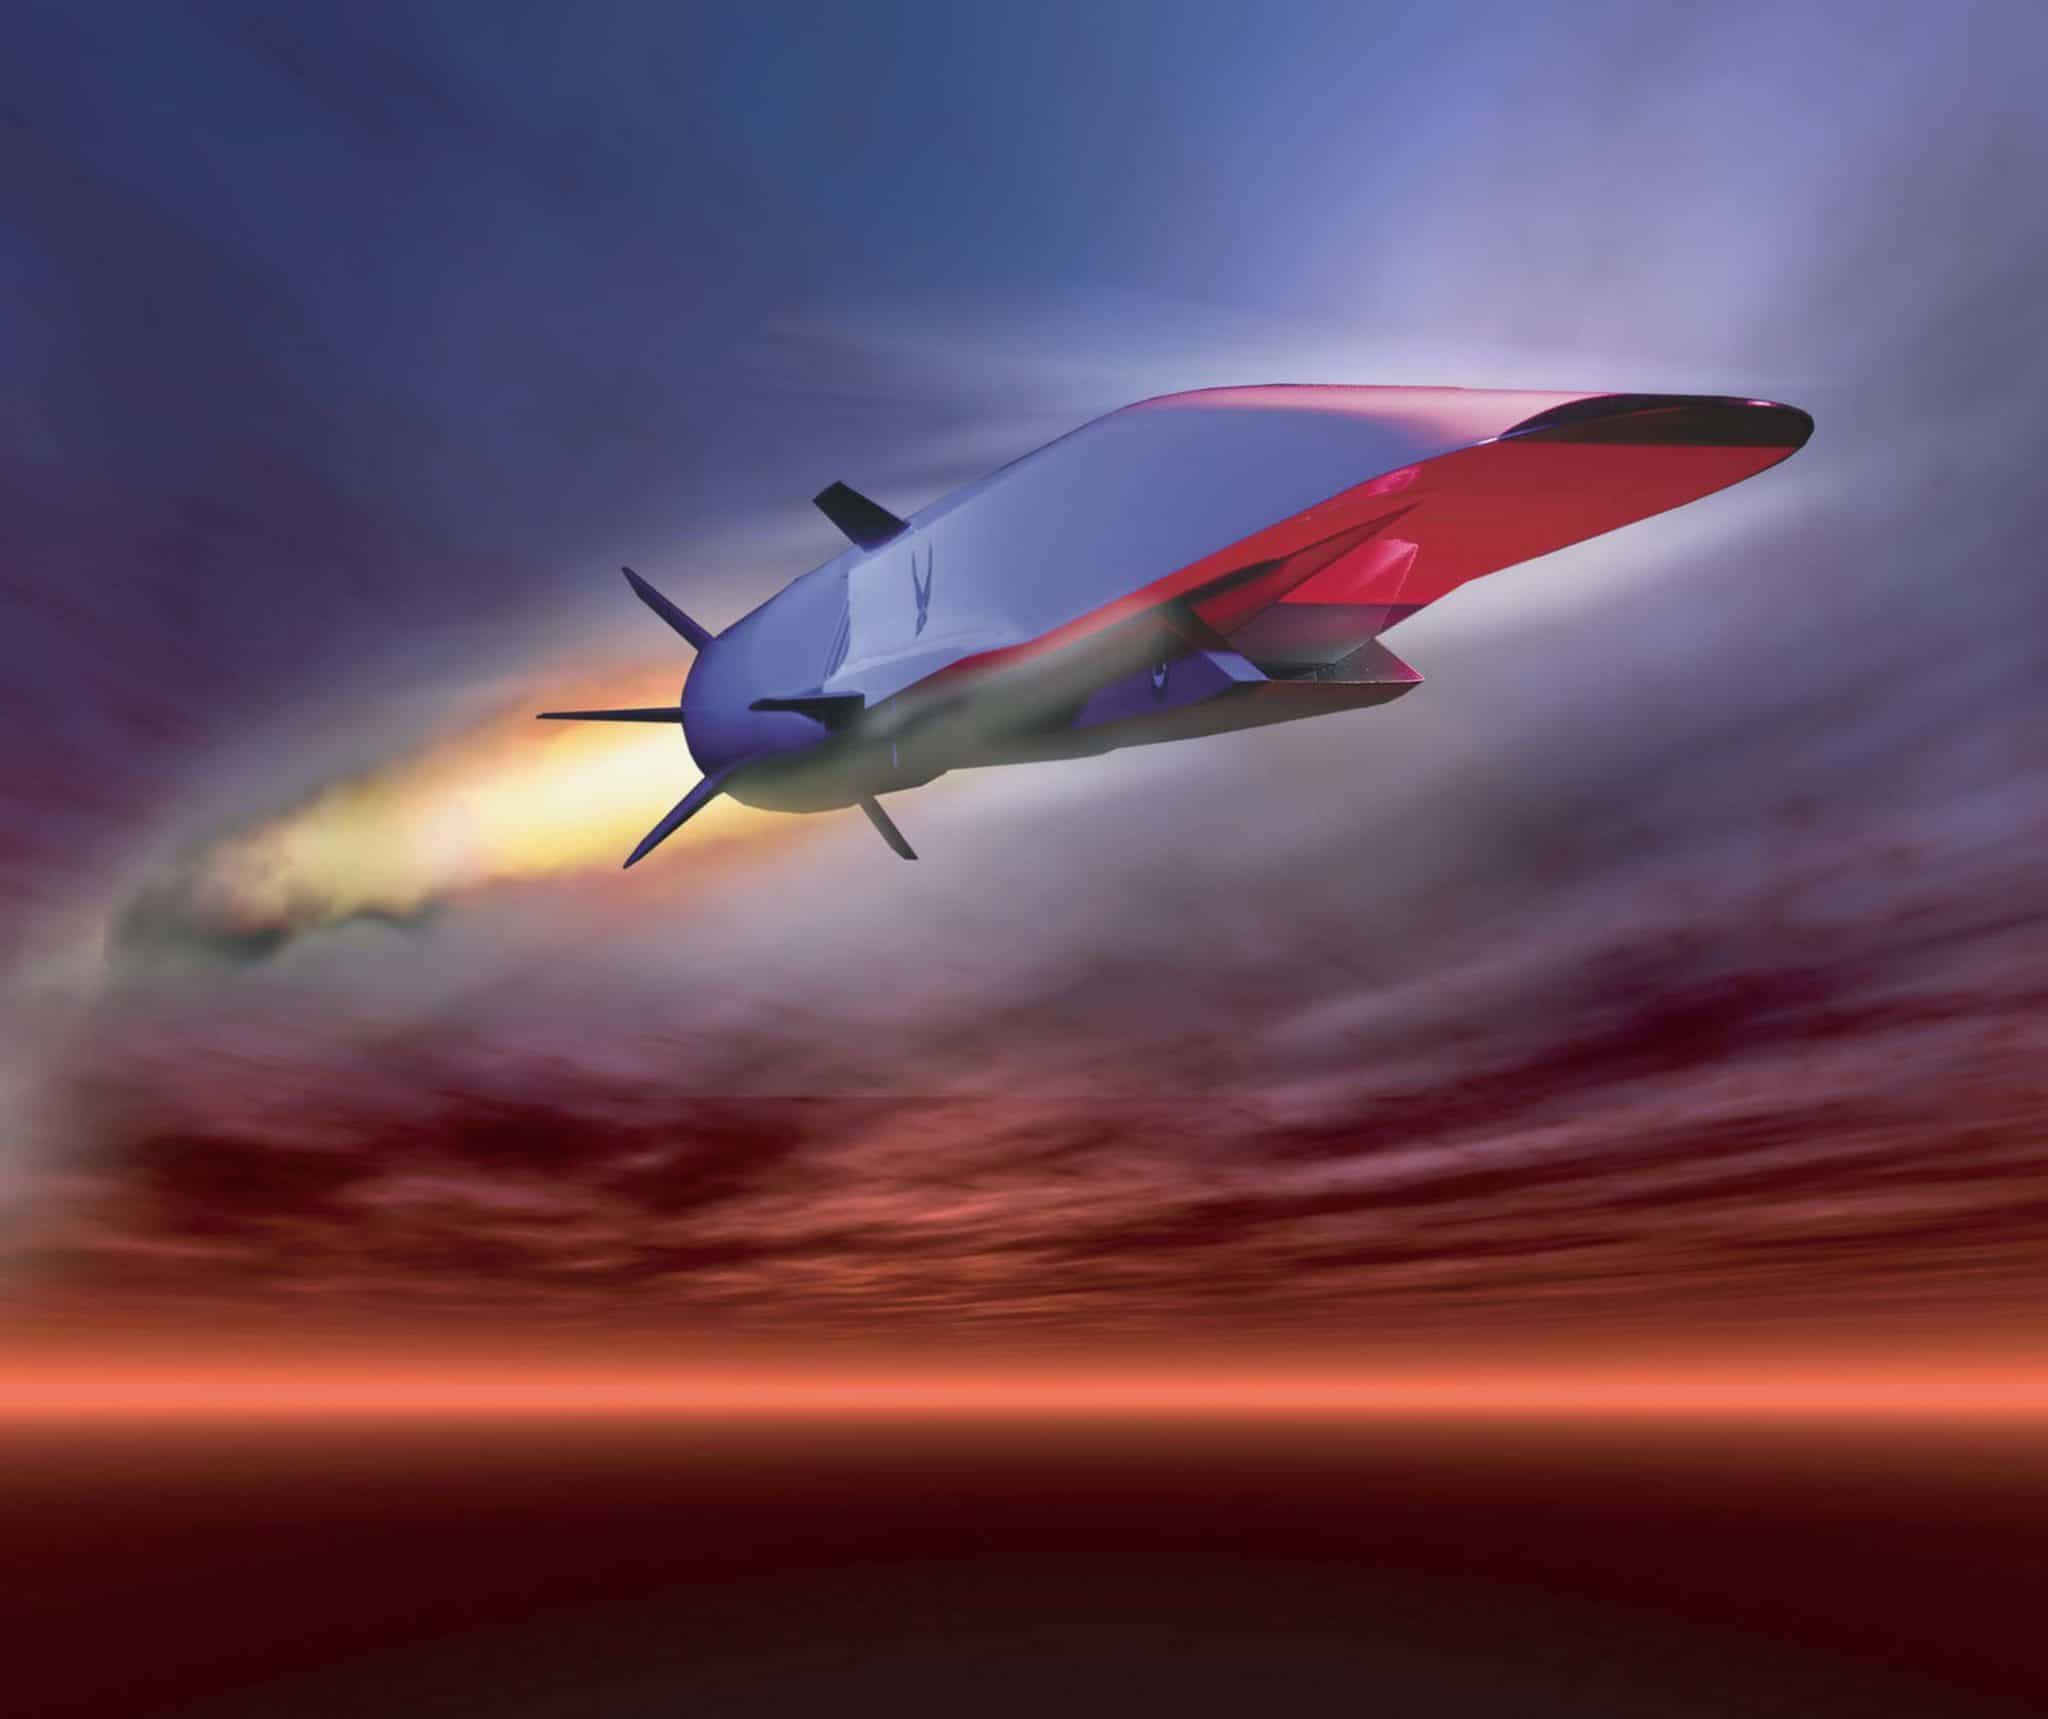 The unmanned Boeing X-51A Waverider was built as a technology demonstrator for the Air Force, to pave the way to future hypersonic weapons. Credit: US Air Force graphic